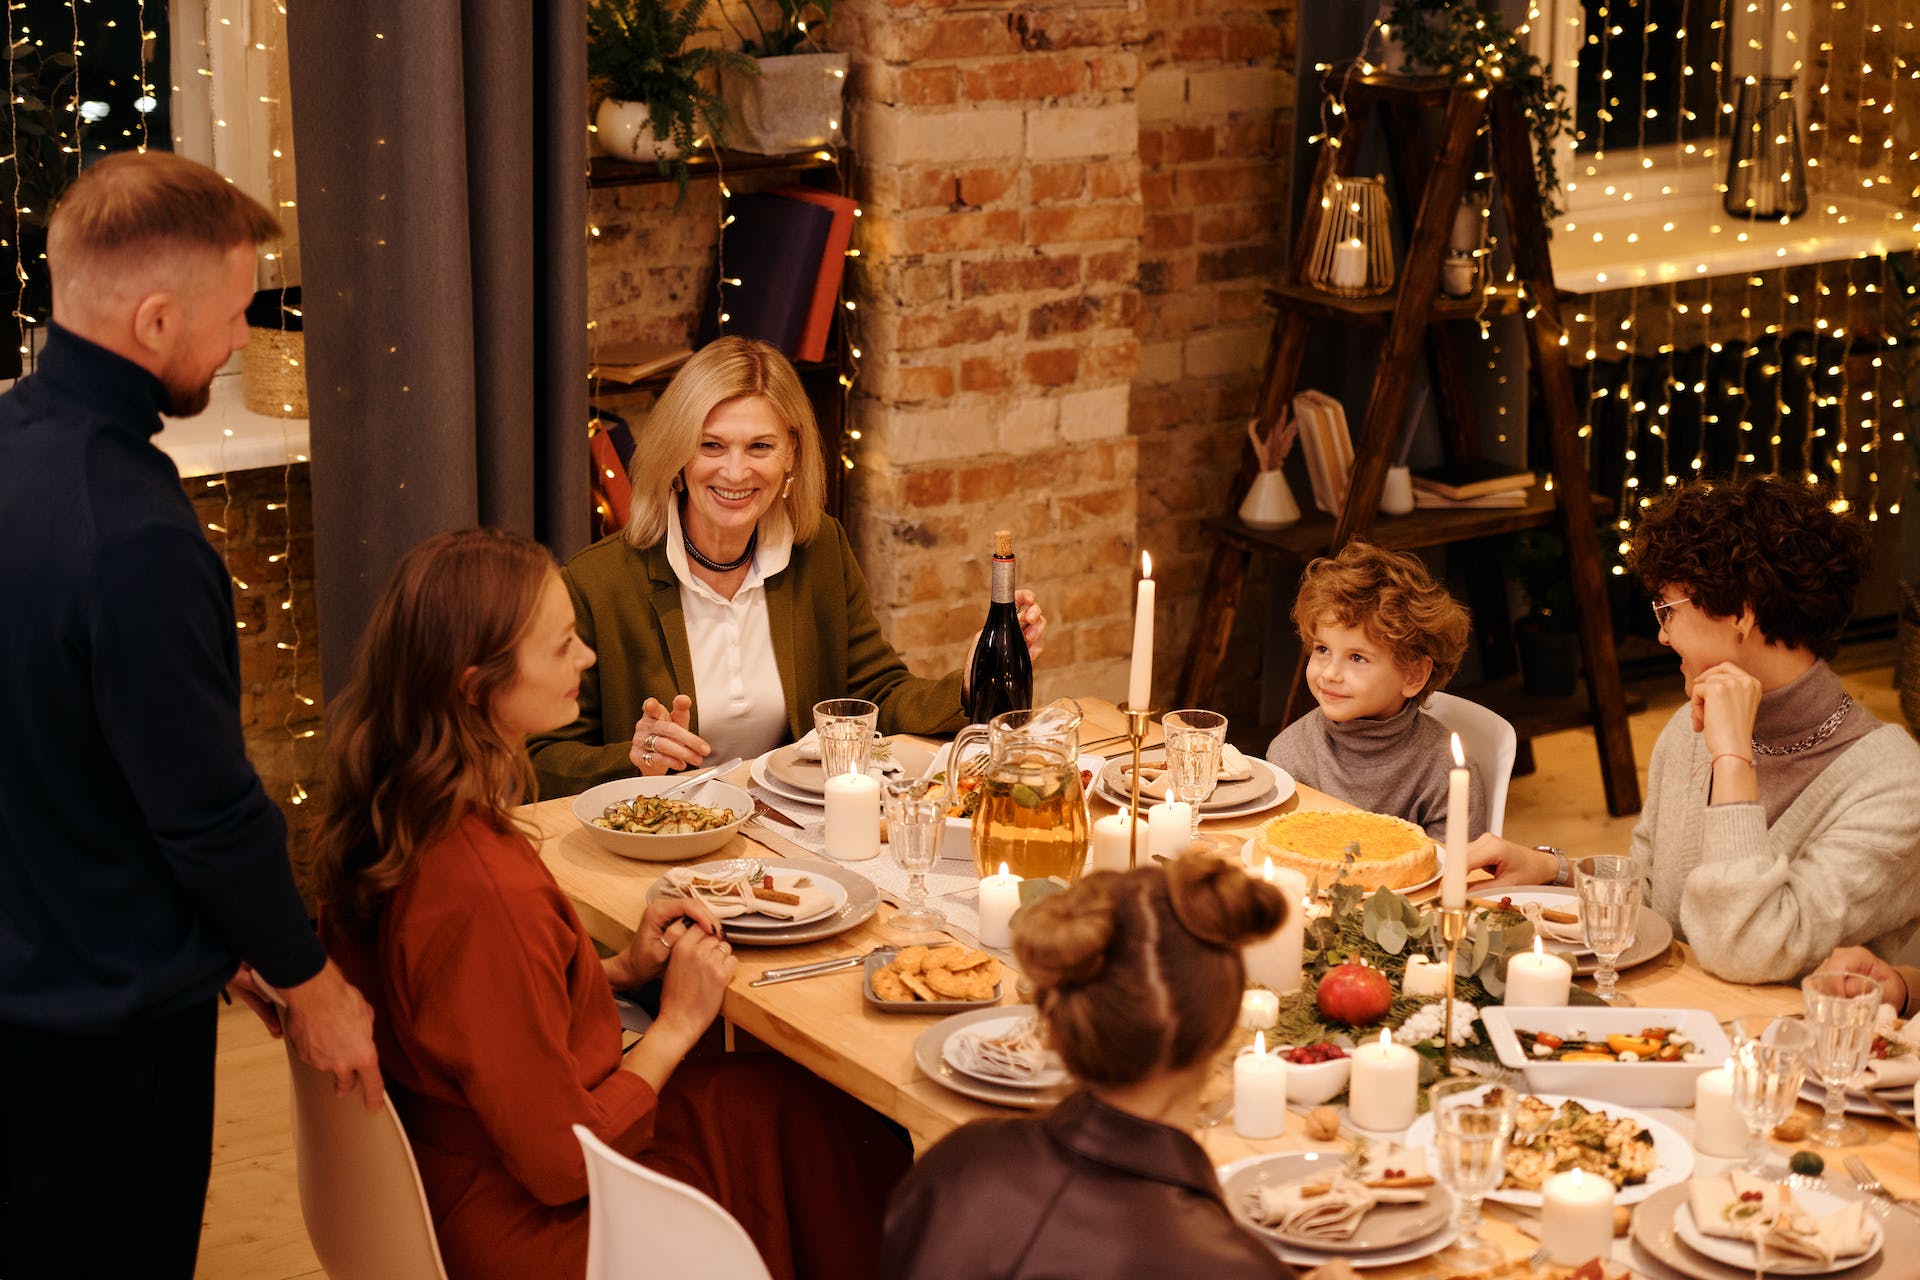 Family members gathered for Christmas dinner | Source: Pexels